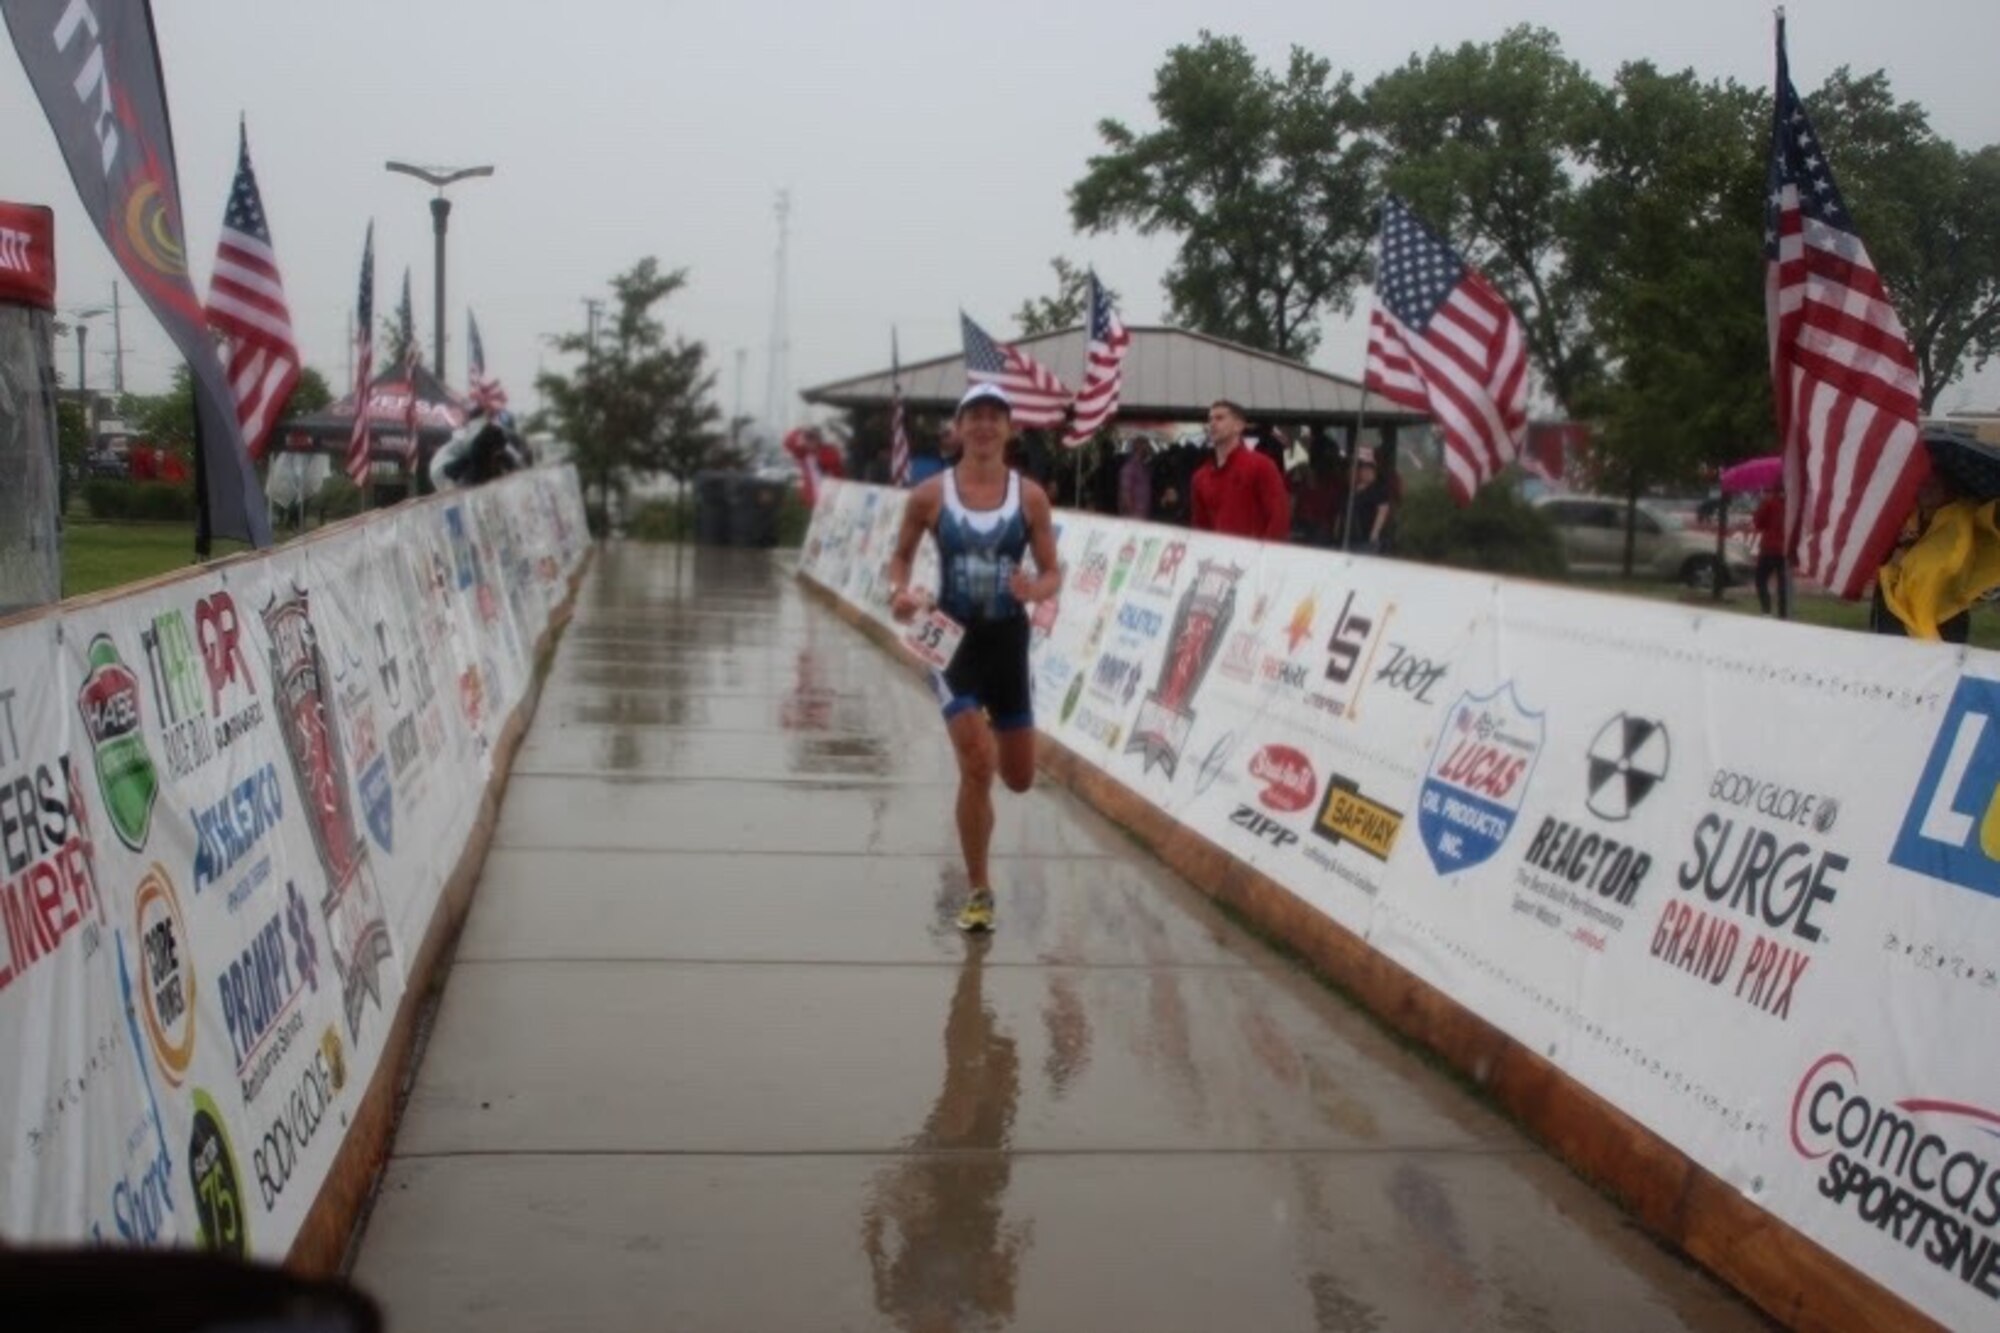 Maj. Jamie Turner runs toward the finish line during the Armed Forces Triathlon Championship race in Hammond, Indiana, June 7, 2015. Turner continued her world-class triathlete success as the second female to cross the finish line and automatically qualified as one of six athletes to compete on the women’s team at the Military World Games in Mungyeong, South Korea, Oct. 2-11, 2015. Turner is a C-17 pilot with the 317th Airlift Squadron. (Courtesy photo)